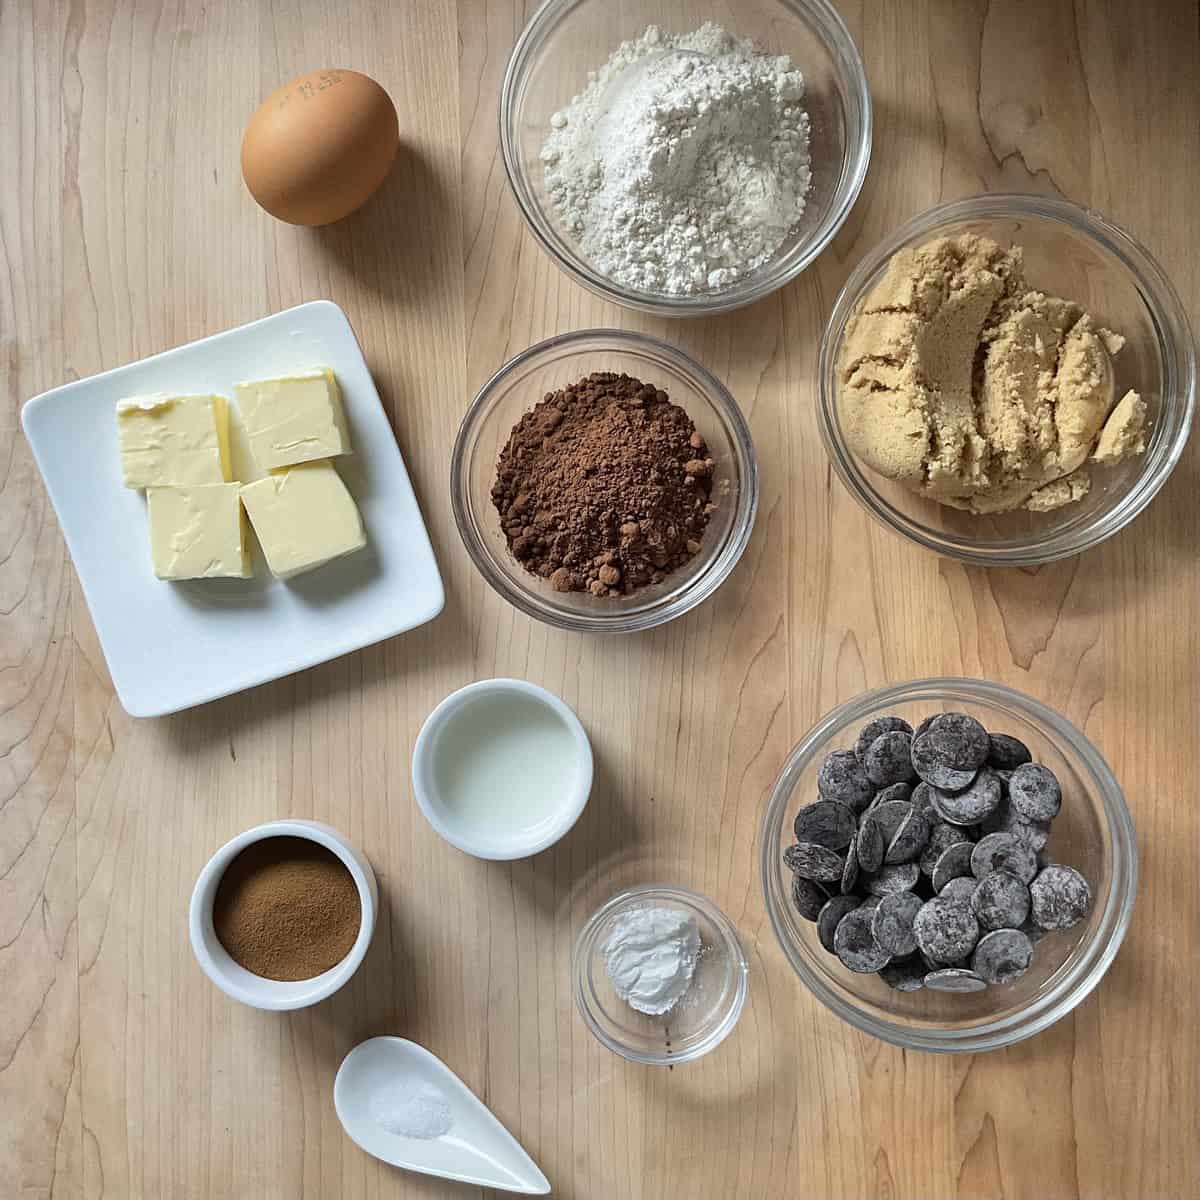 Ingredients to make chocolate crinkle cookies on a wooden board.